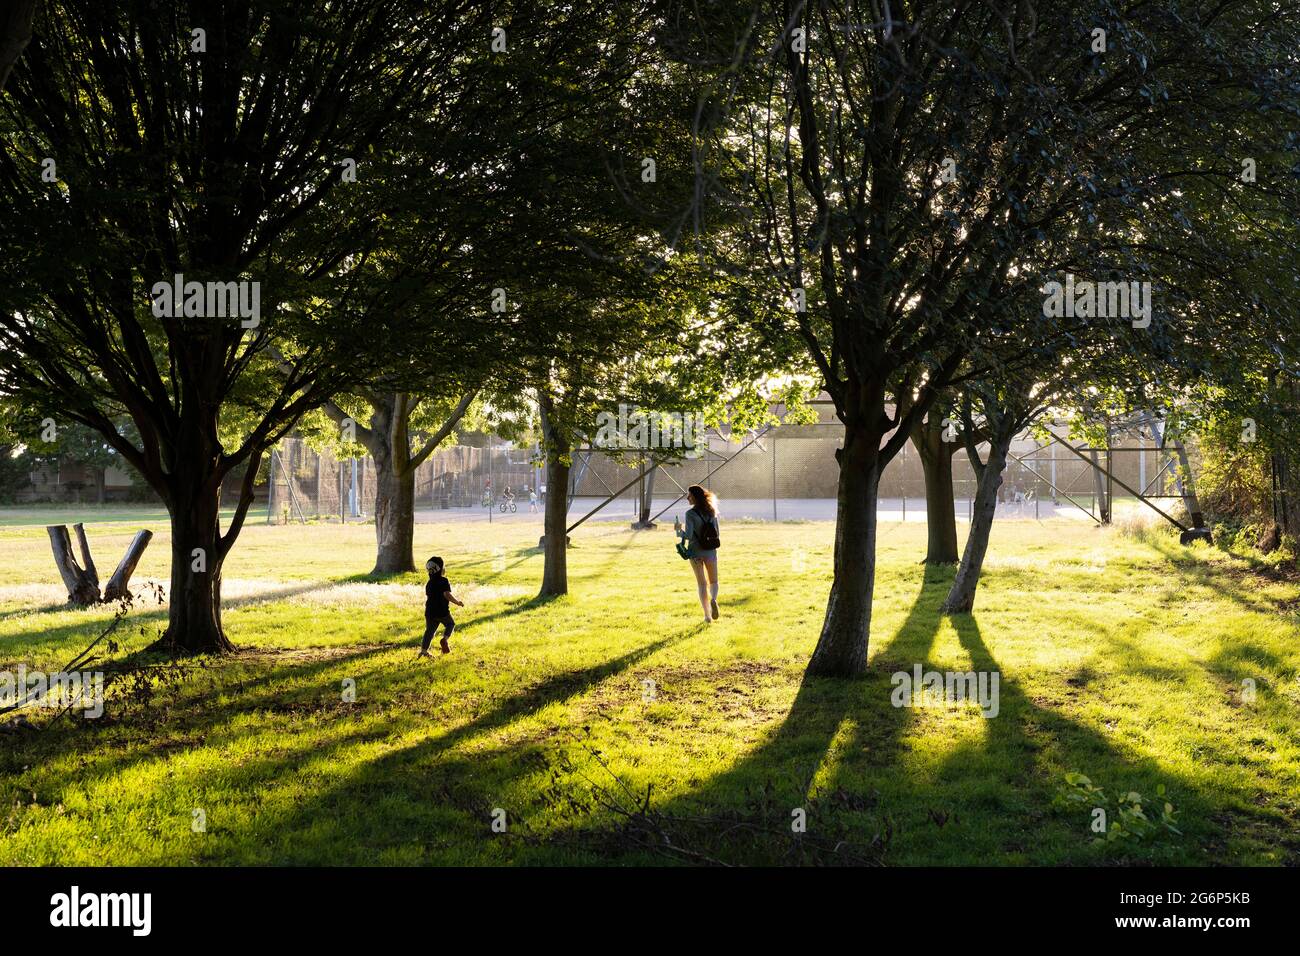 A mother and a child chasing each other amongst trees Stock Photo